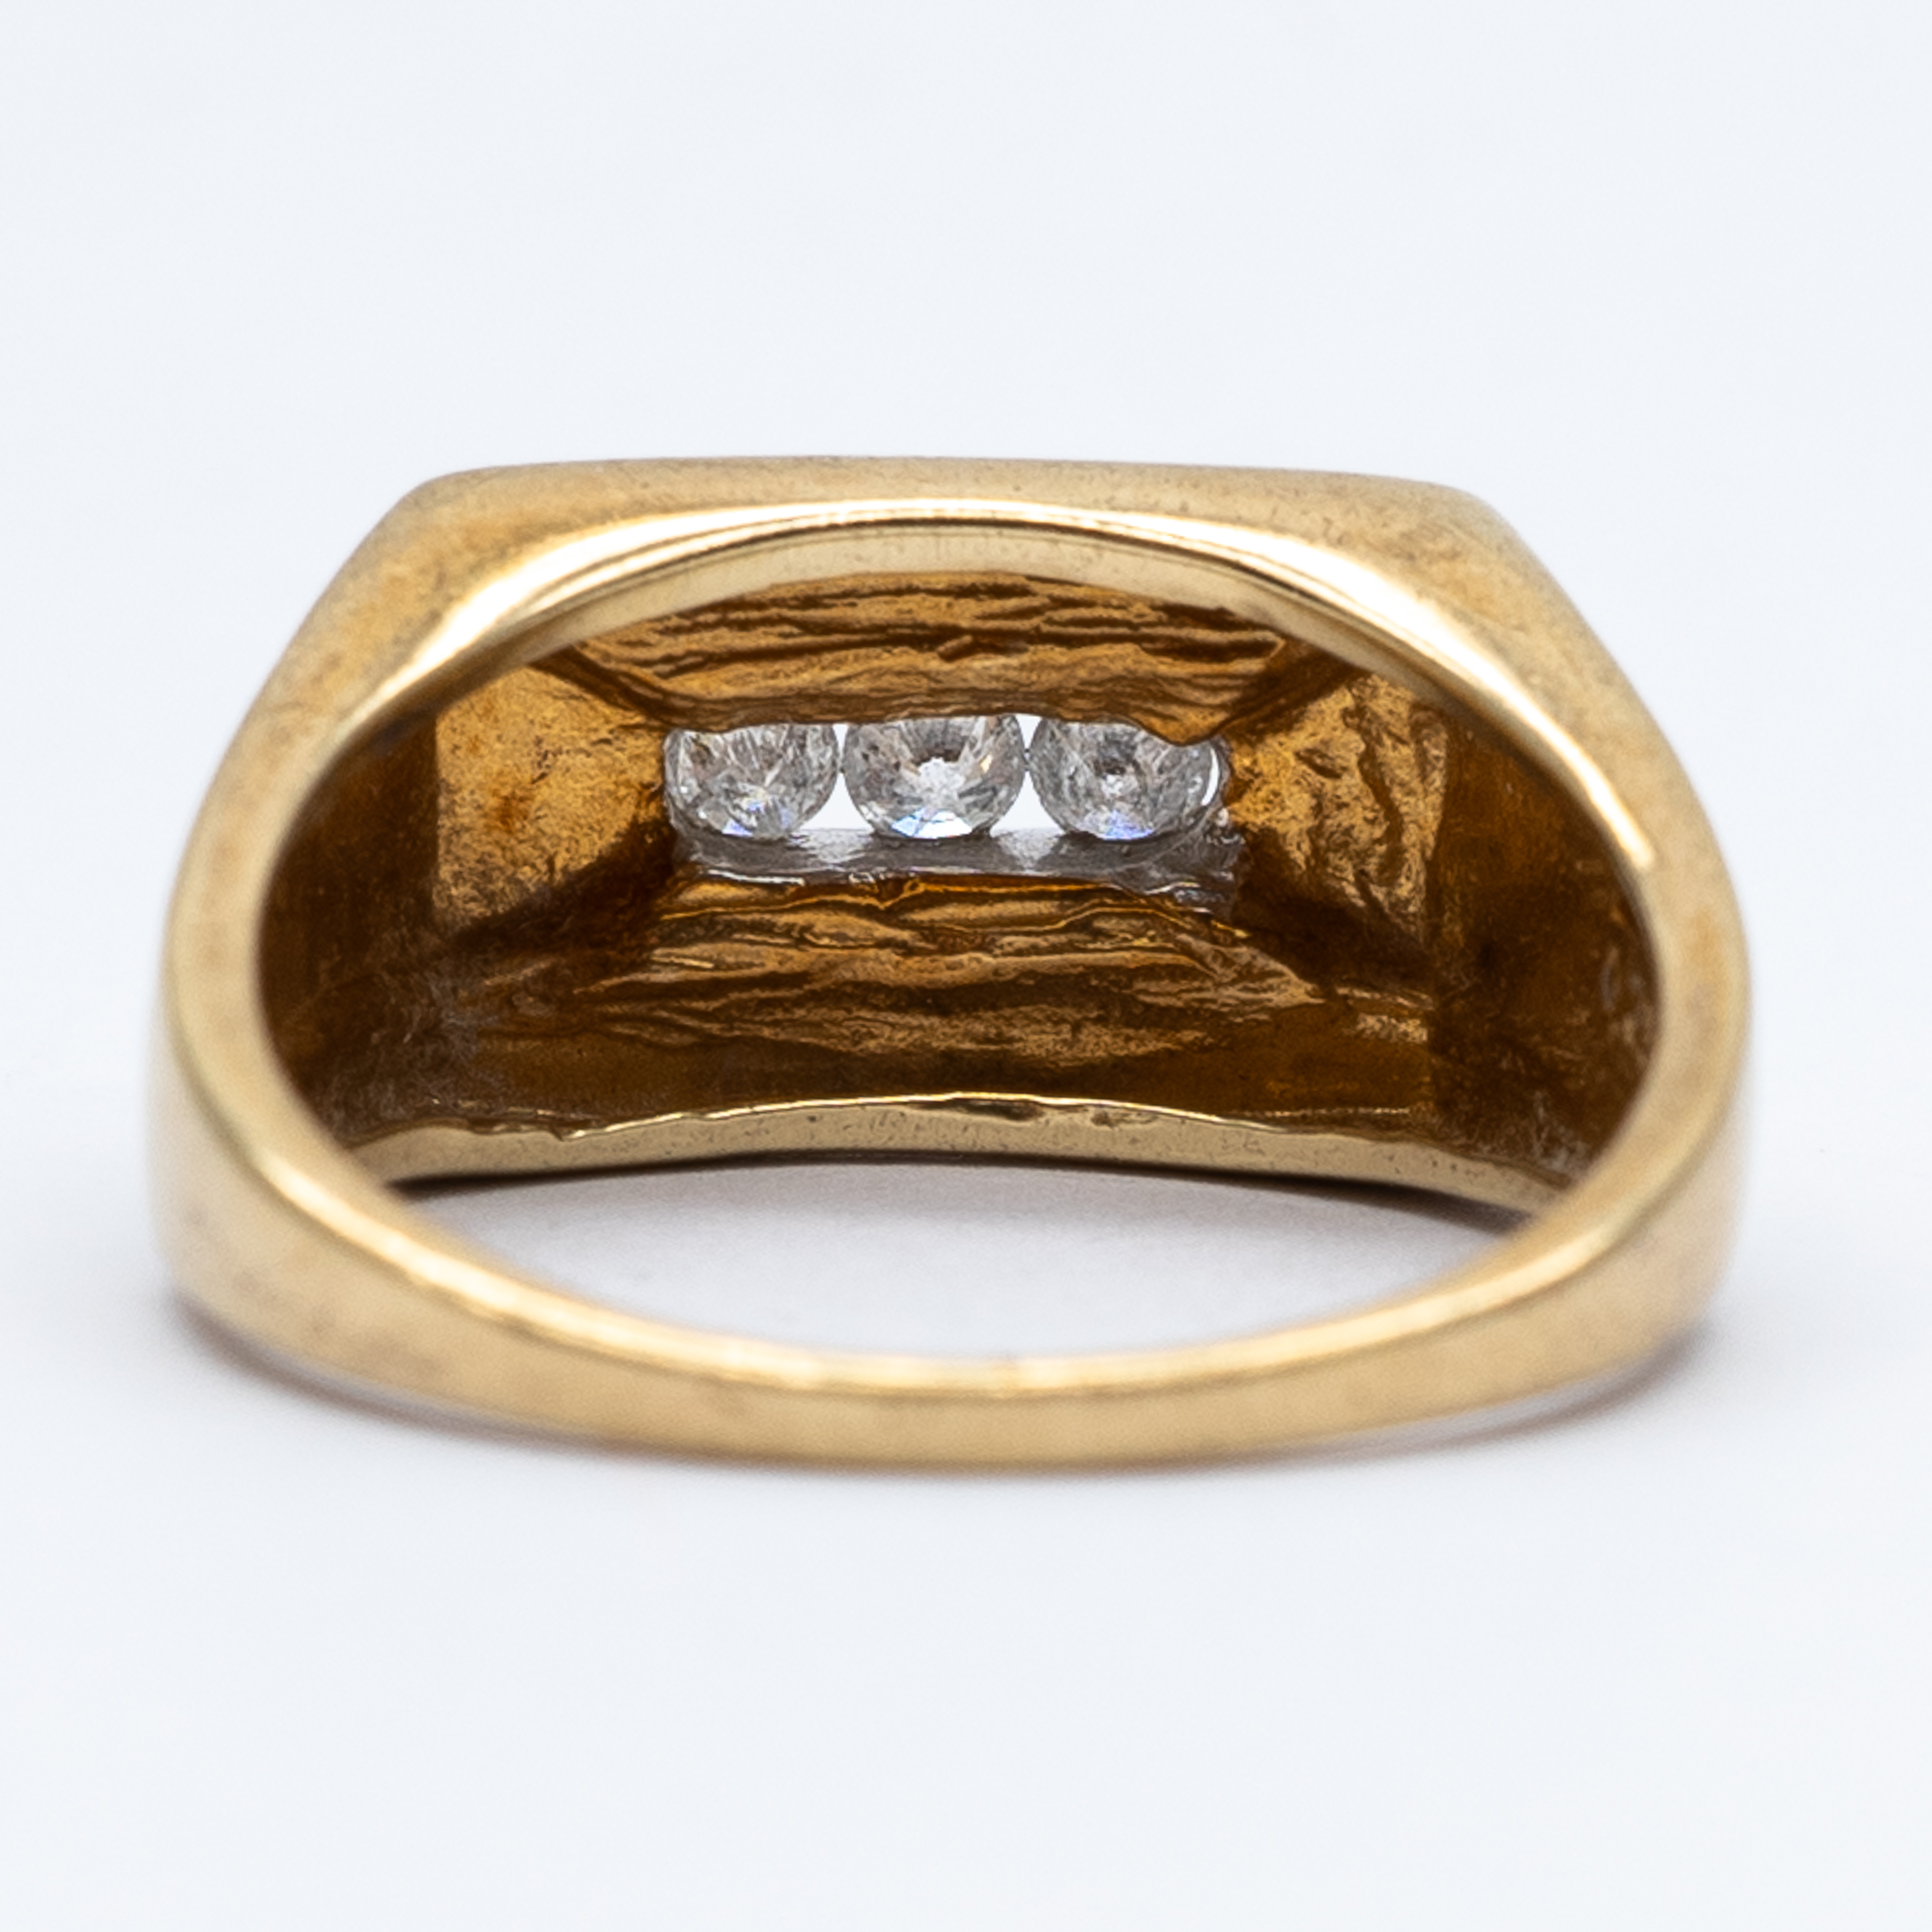 A 9ct yellow gold diamond signet ring - Image 2 of 5